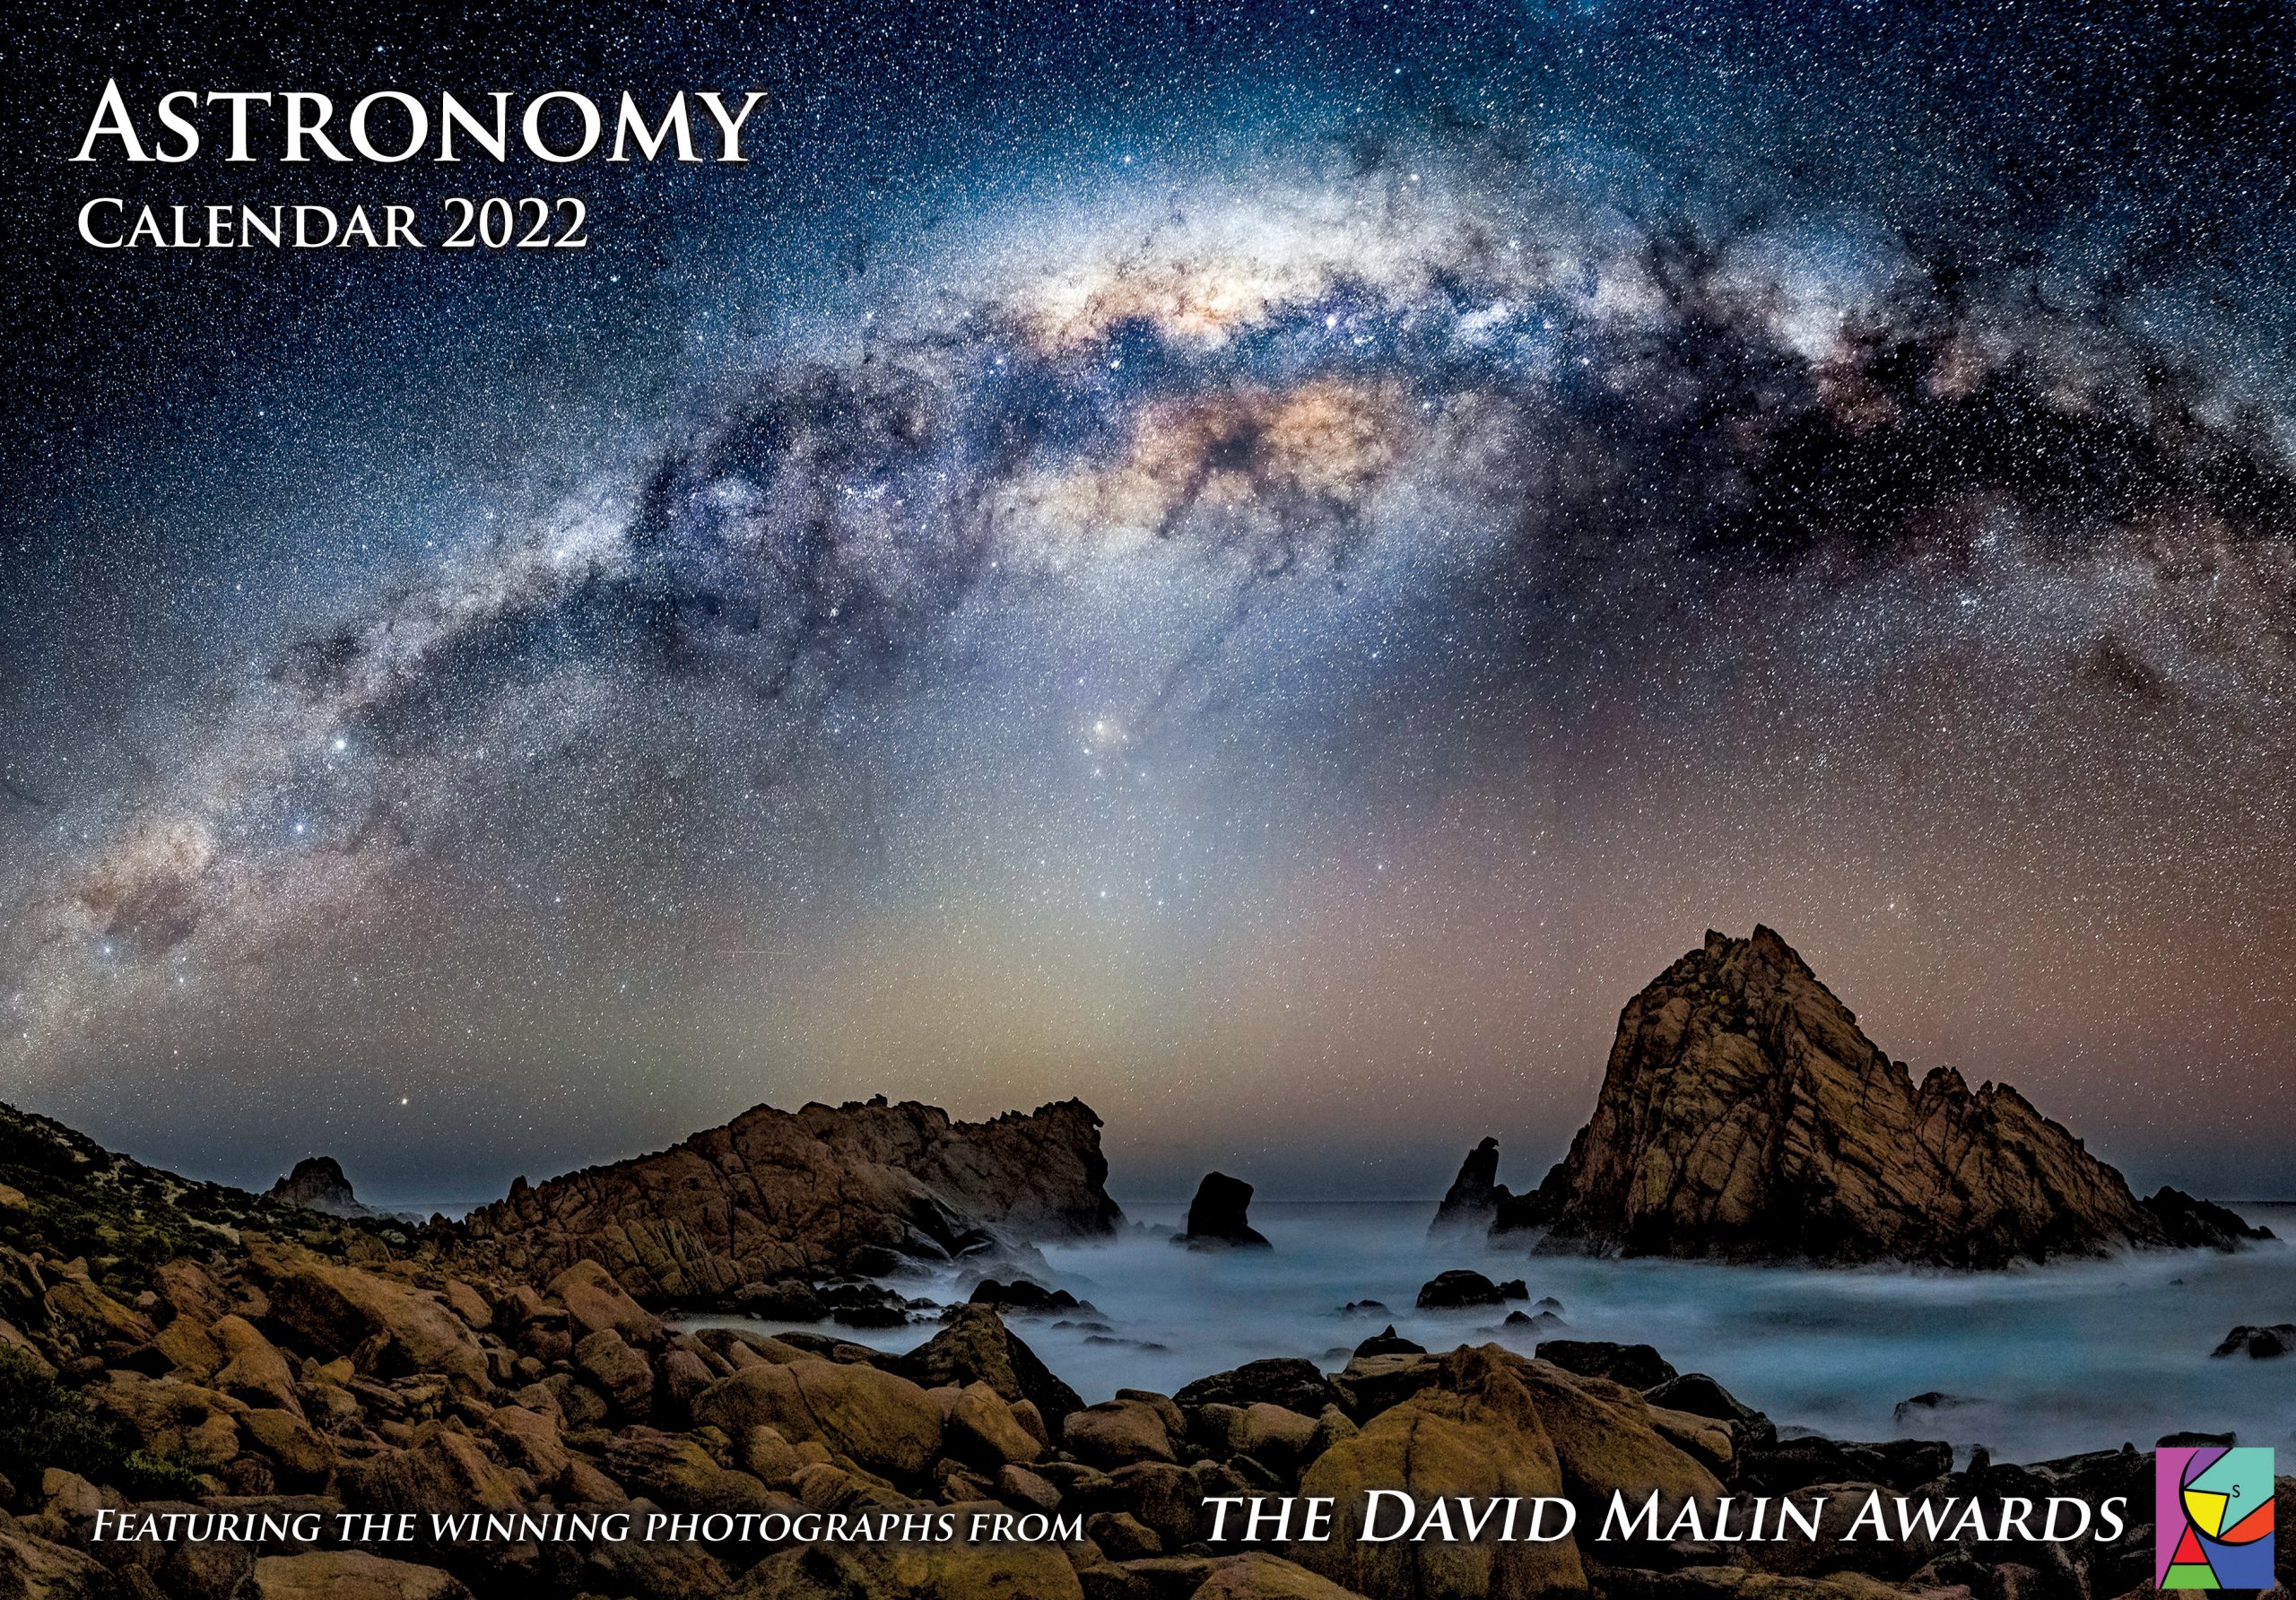 Milky Way Viewing Calendar 2022 Astronomy Calendar 2022 Out Of Stock! - Astrovisuals